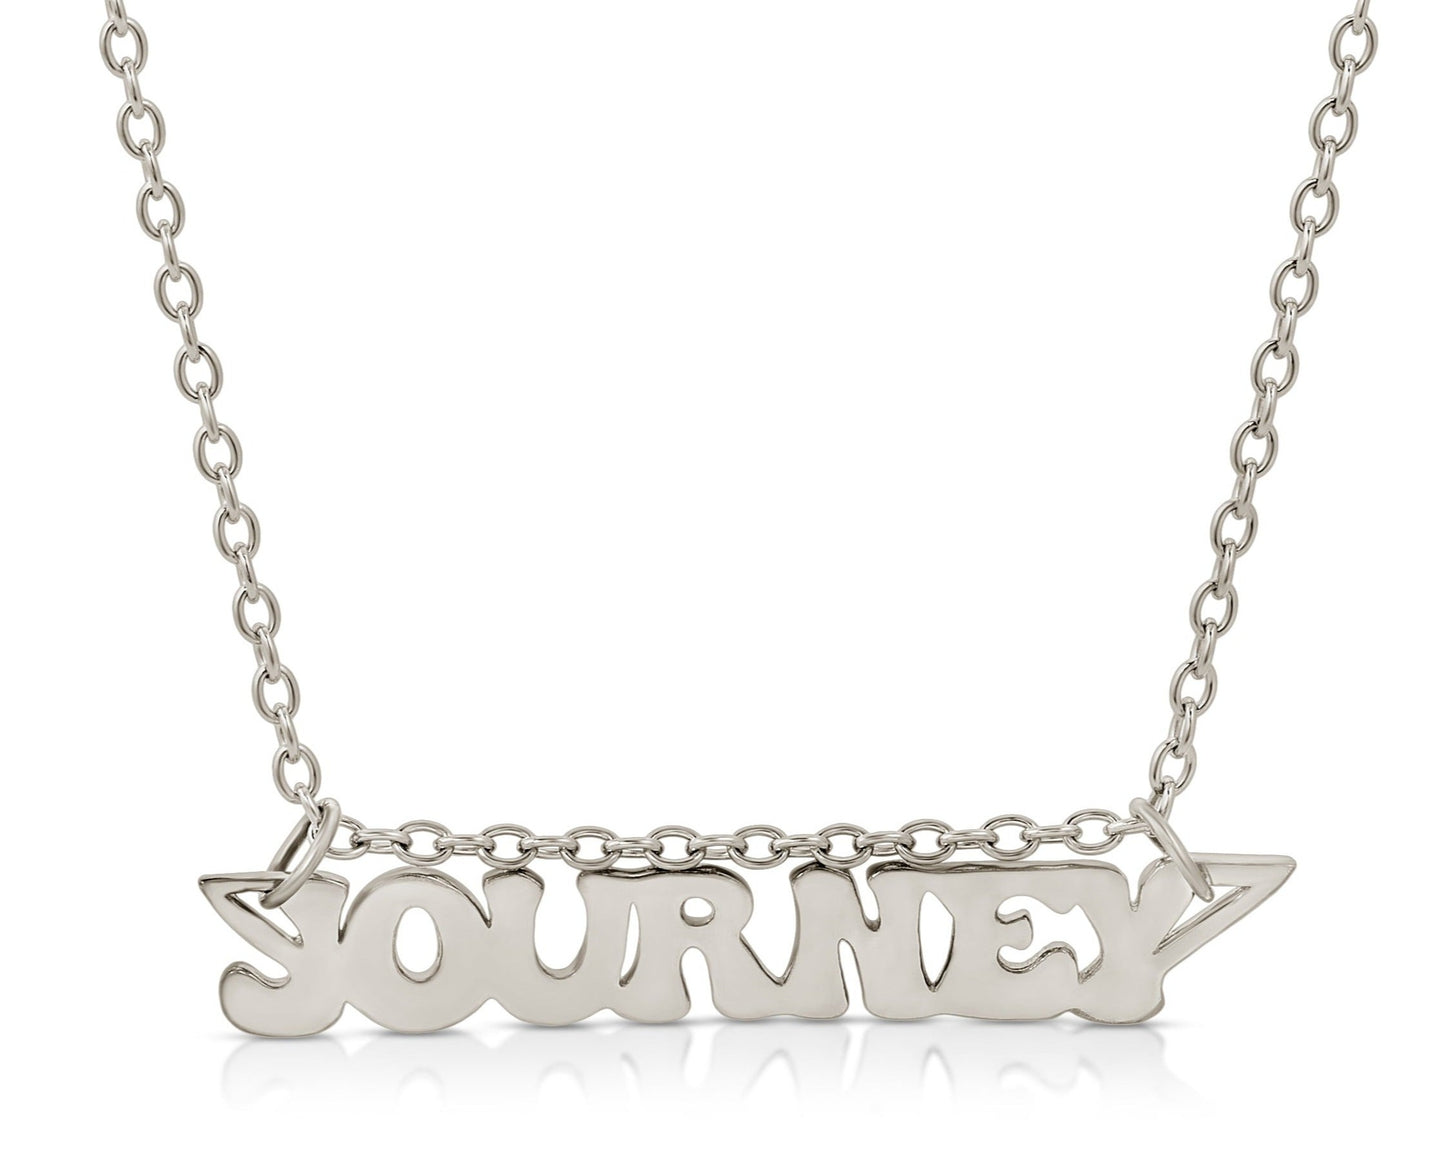 18K solid gold white gold necklace that says journey